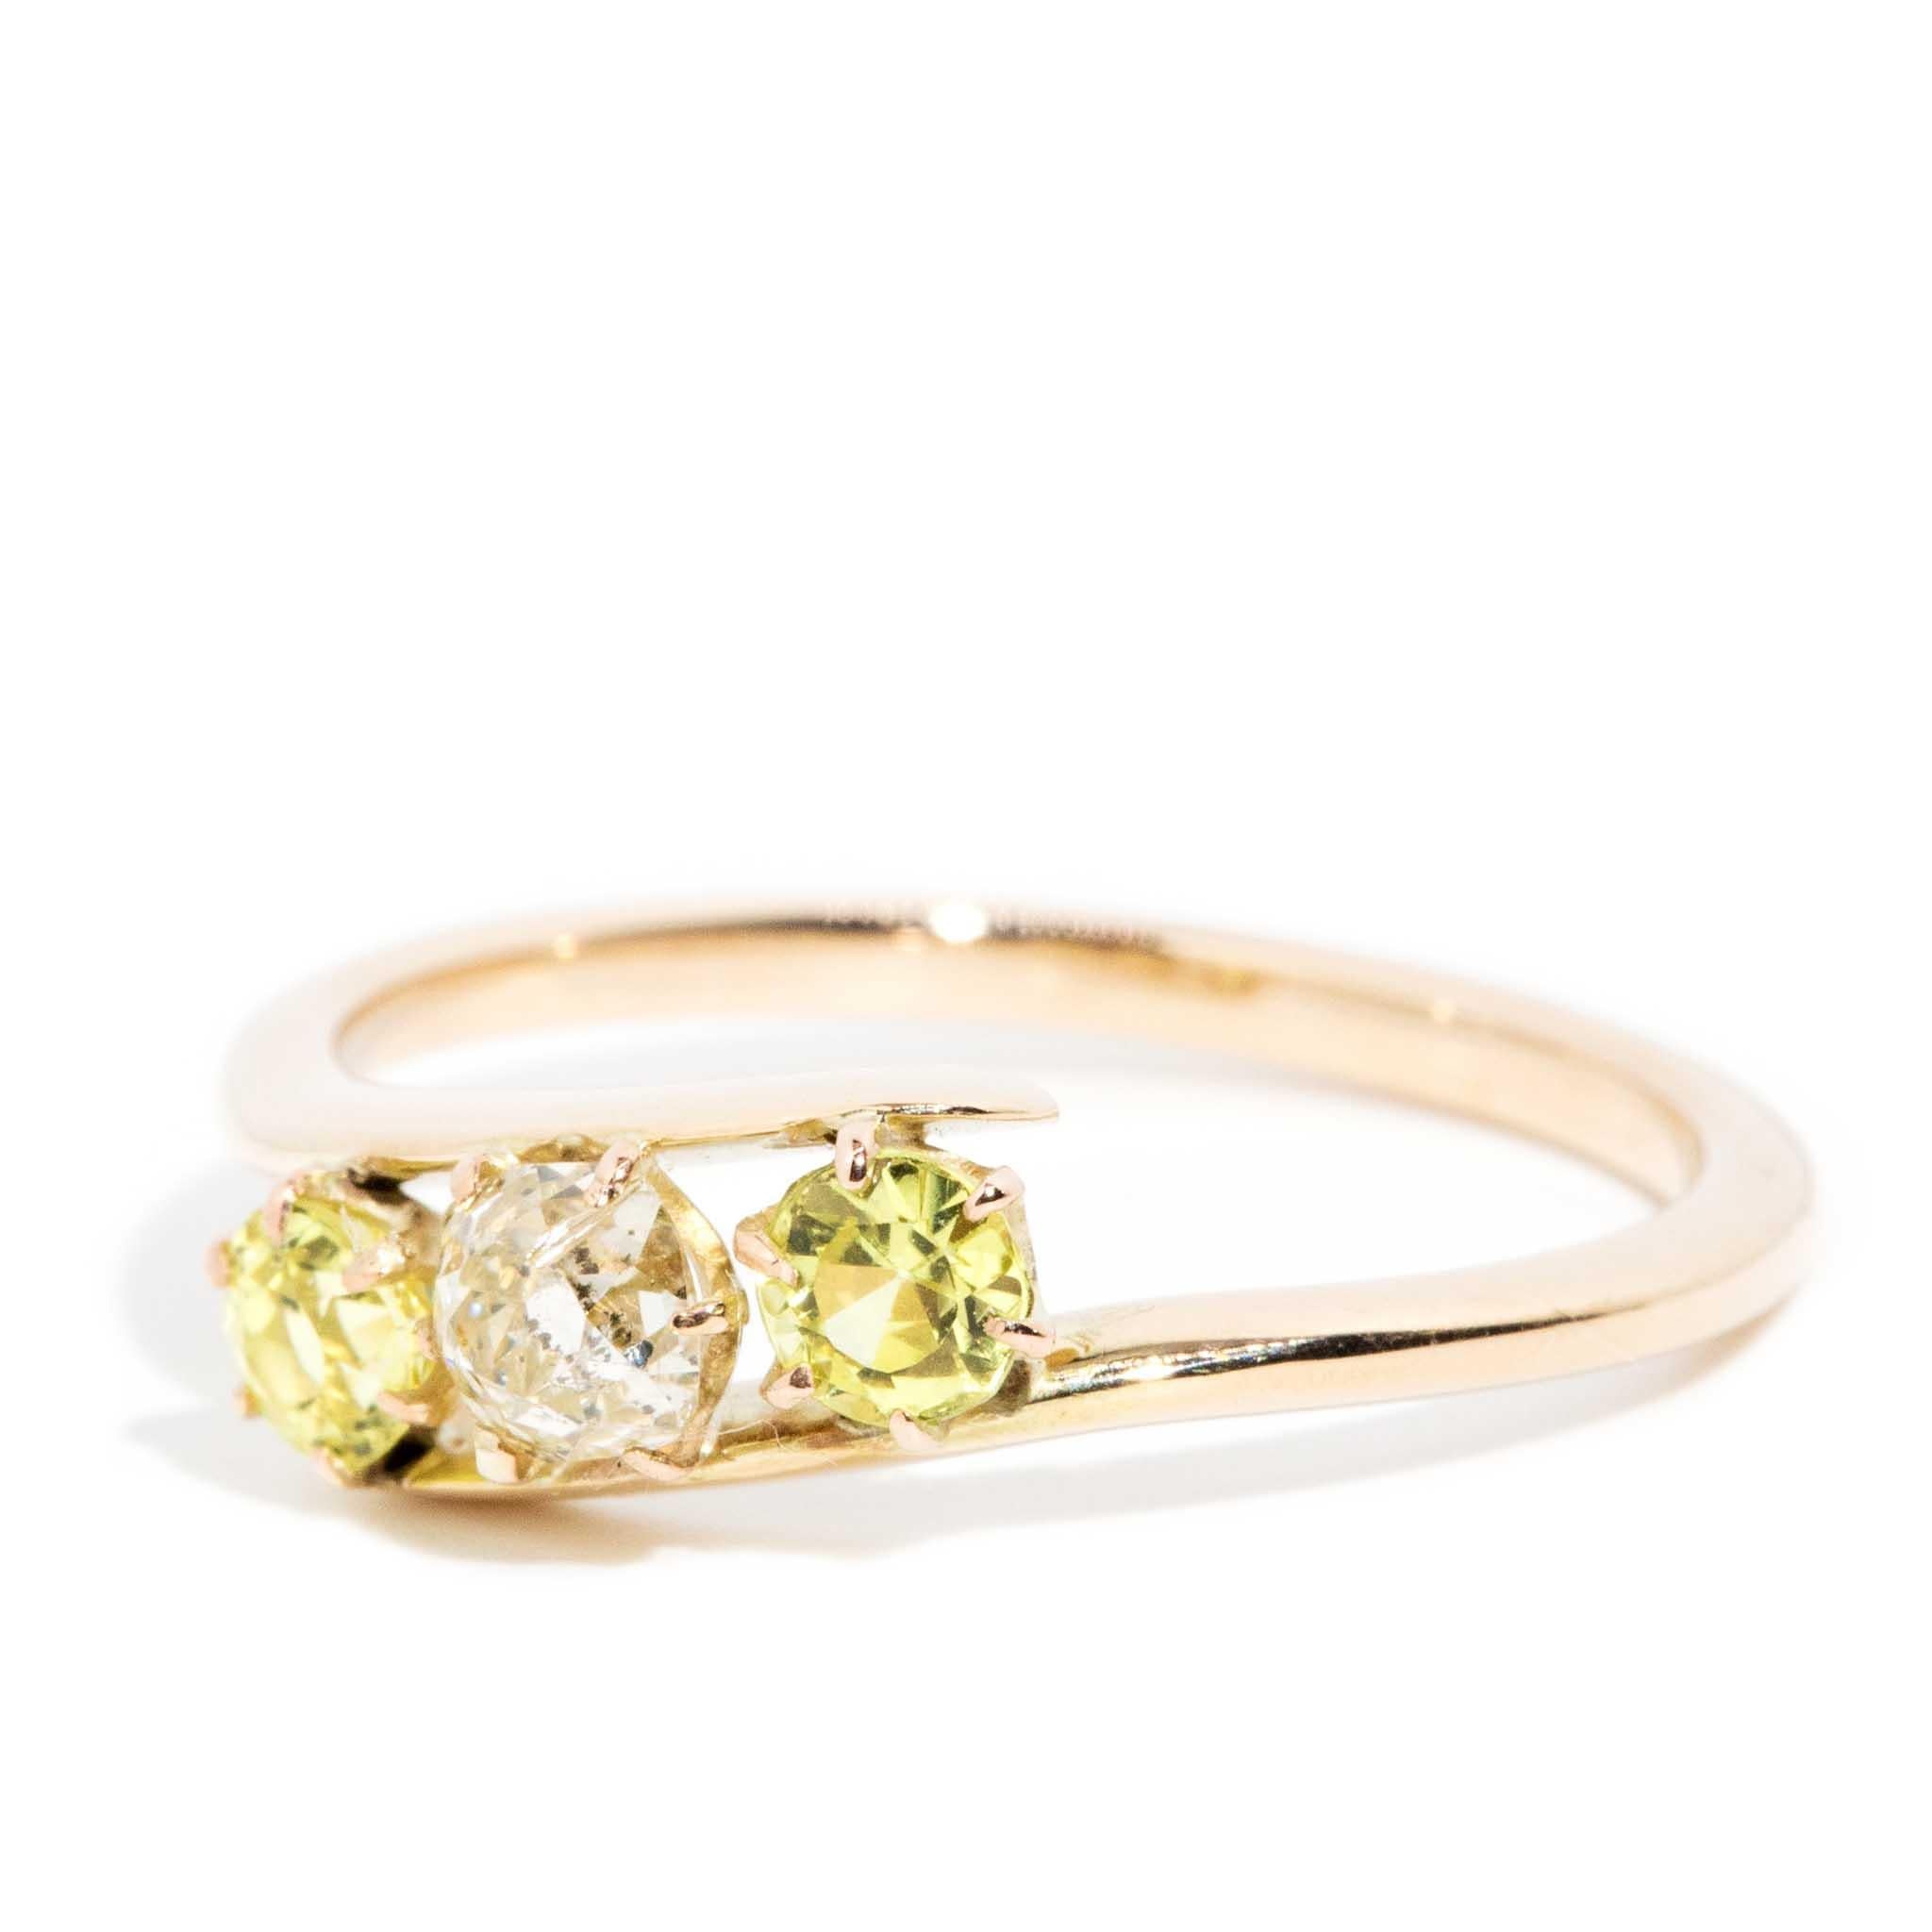 Vintage Circa 1960s Old Mine Cut Diamond Sapphire Ring 14 Carat Yellow Gold In Good Condition For Sale In Hamilton, AU